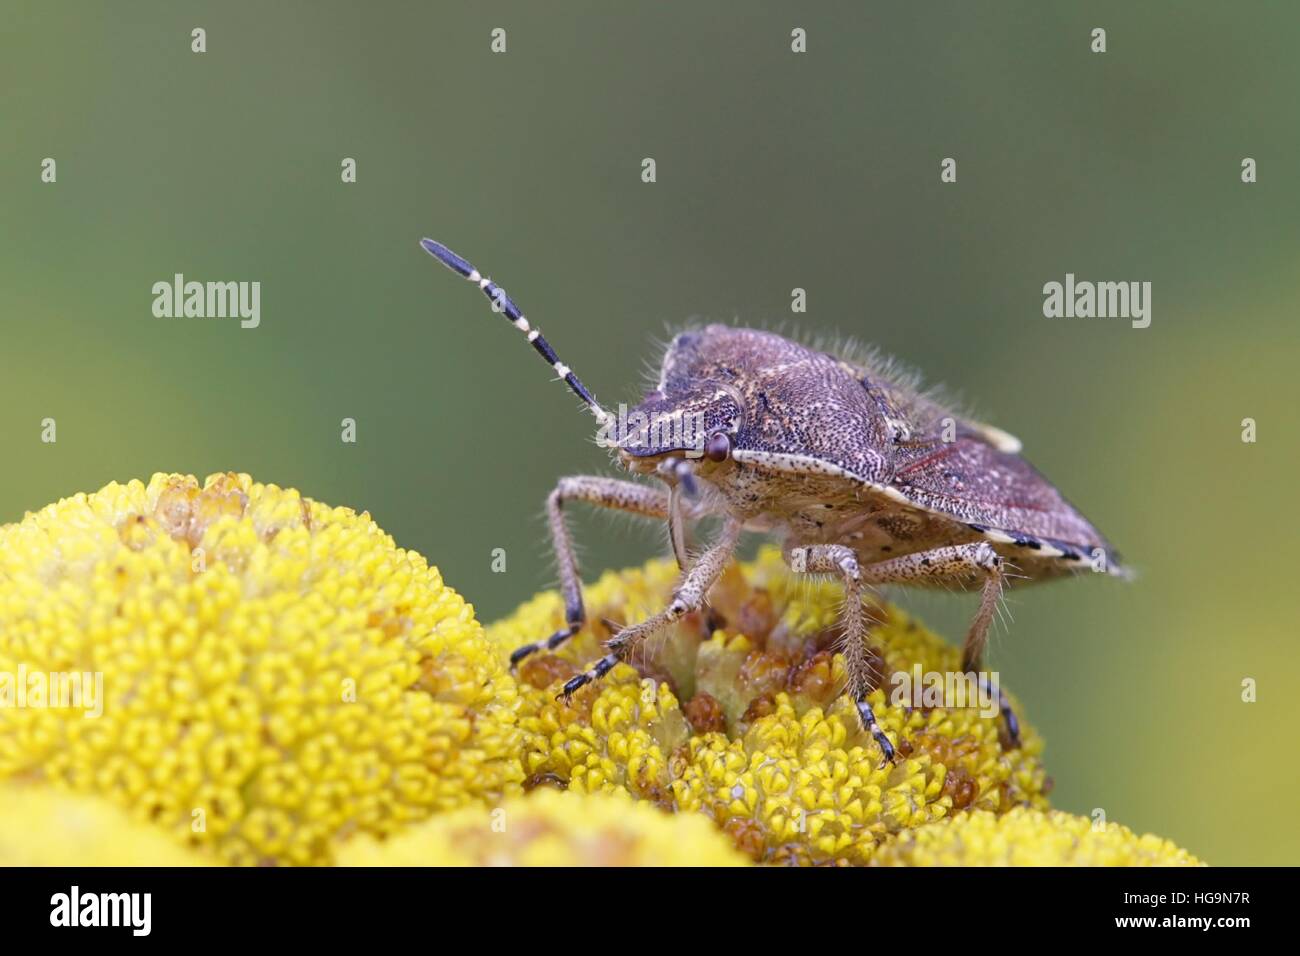 Nymph of Sloe Bug and flowers of Tansy Stock Photo